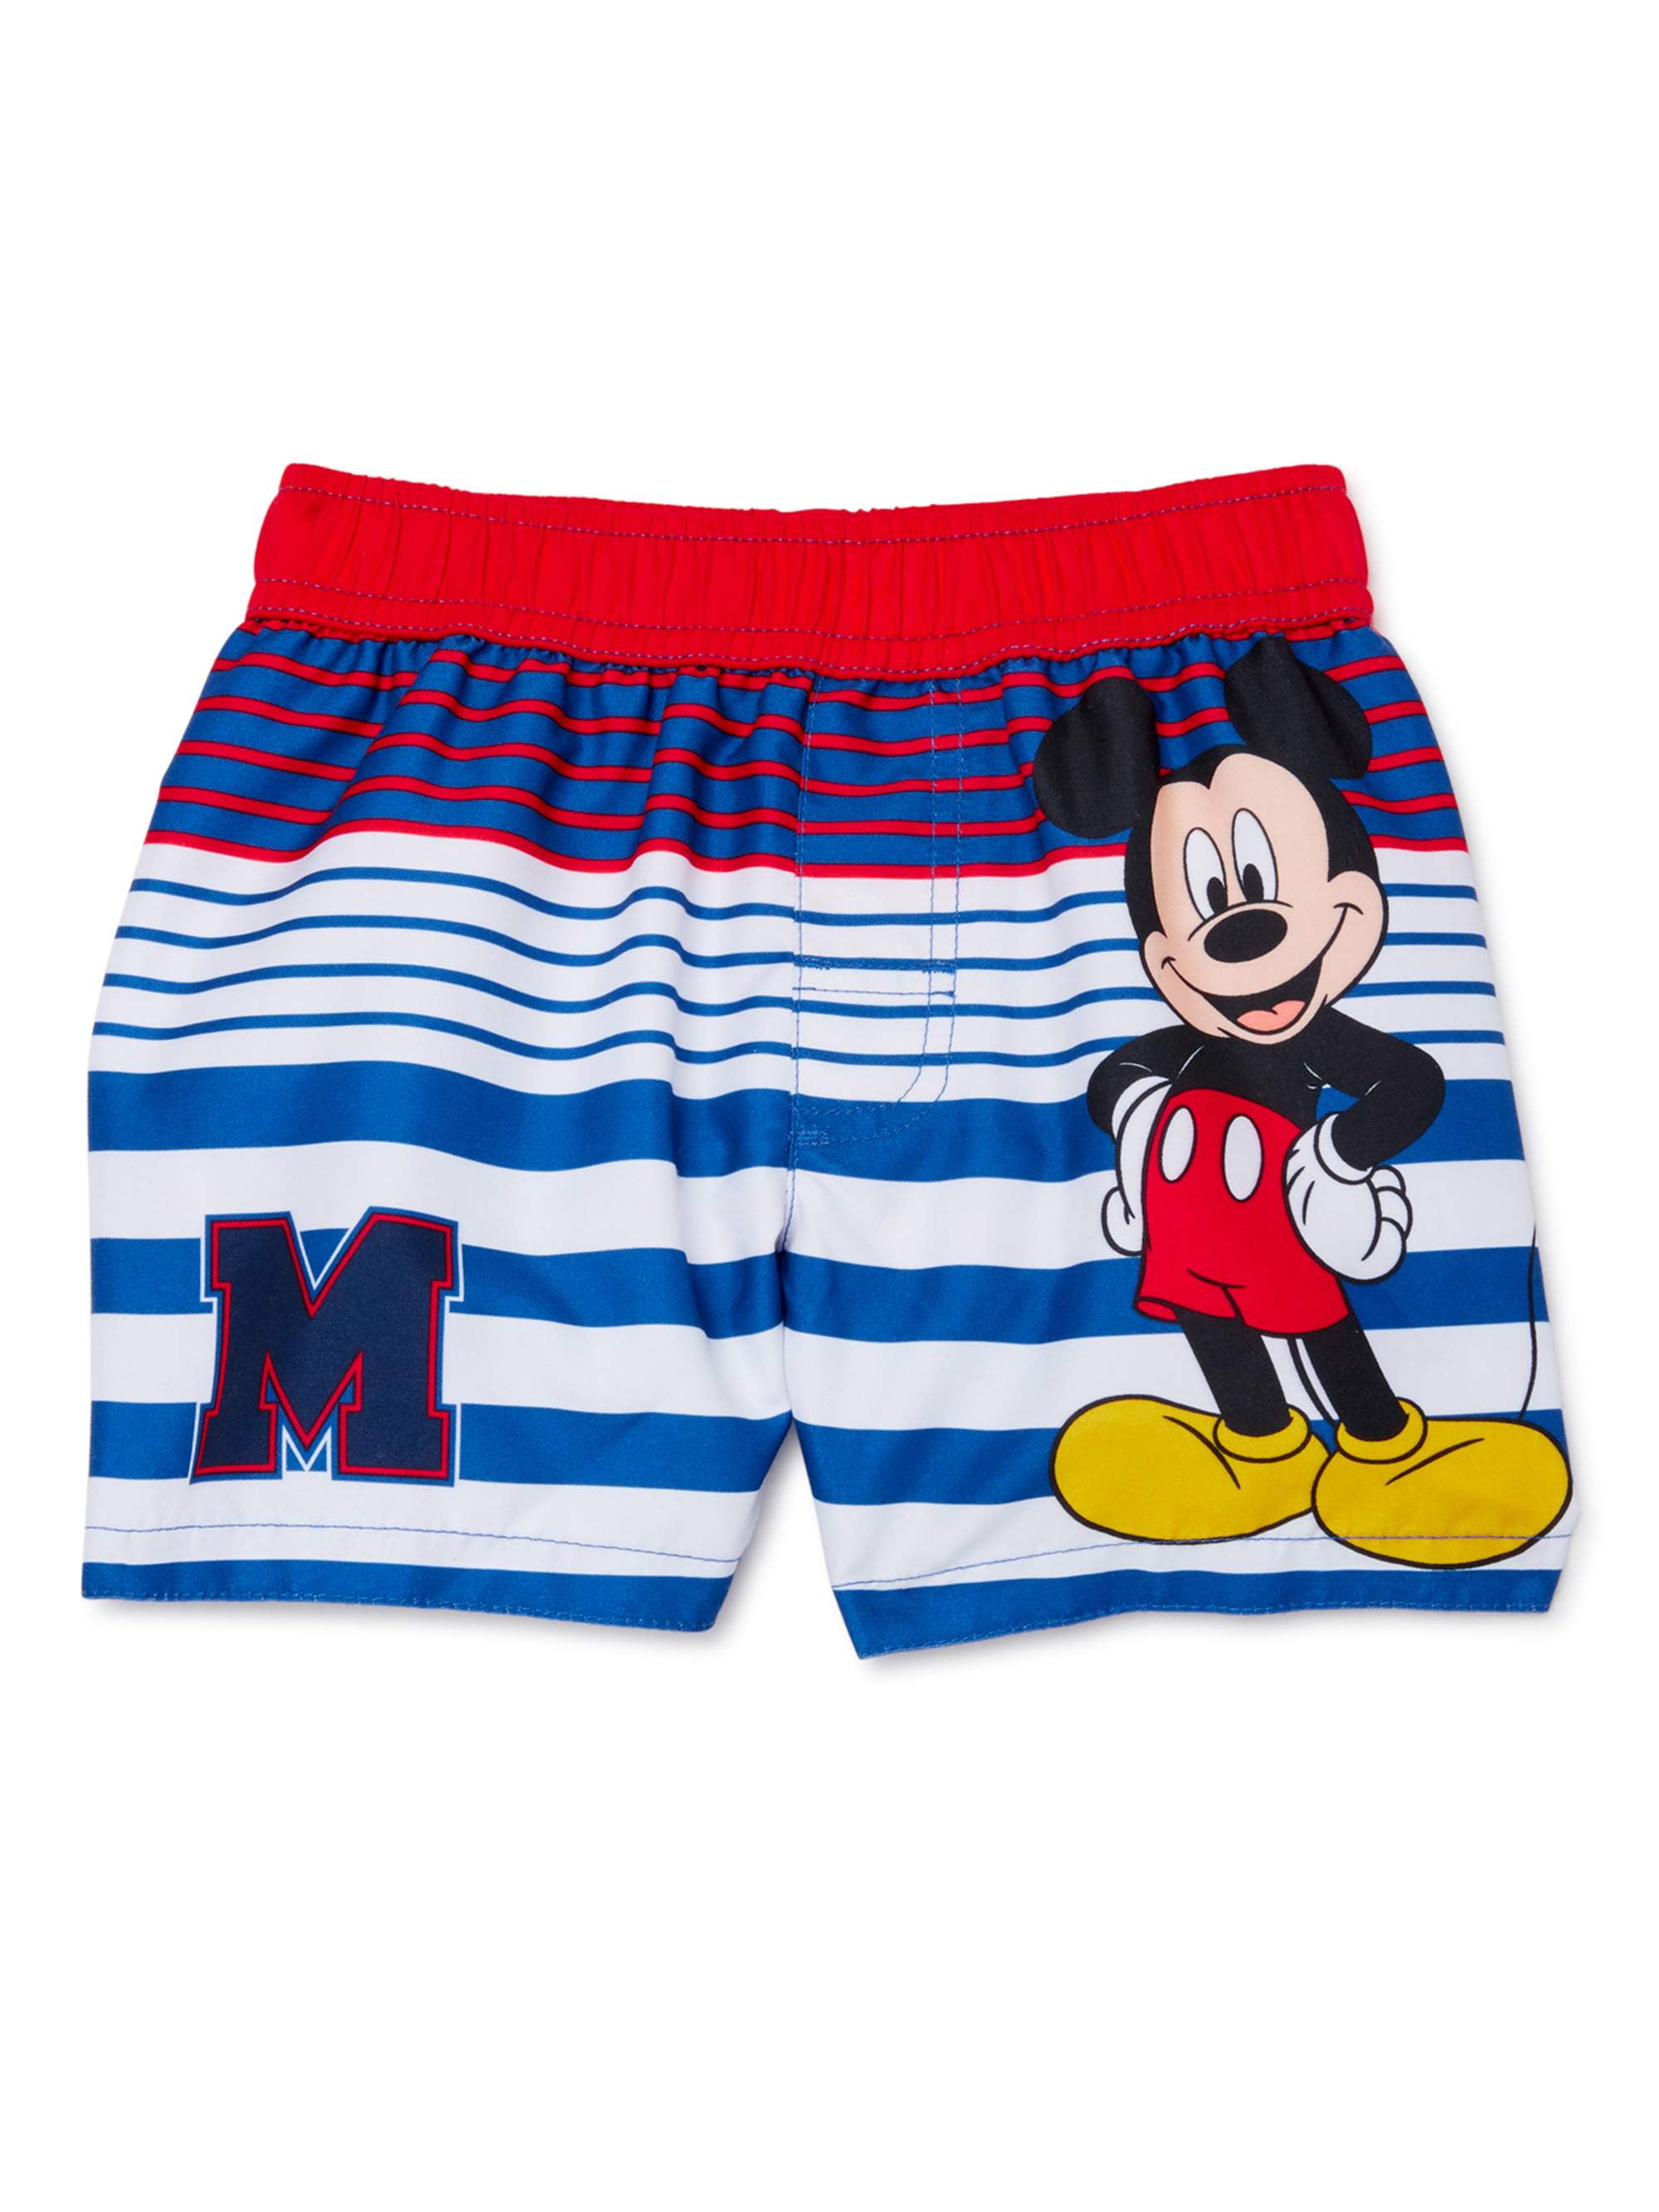 MICKEY MOUSE Infant Boys 0-3 3-6 6-9 18 24 Months Shorts SWIM TRUNKS NEW W TAGS 